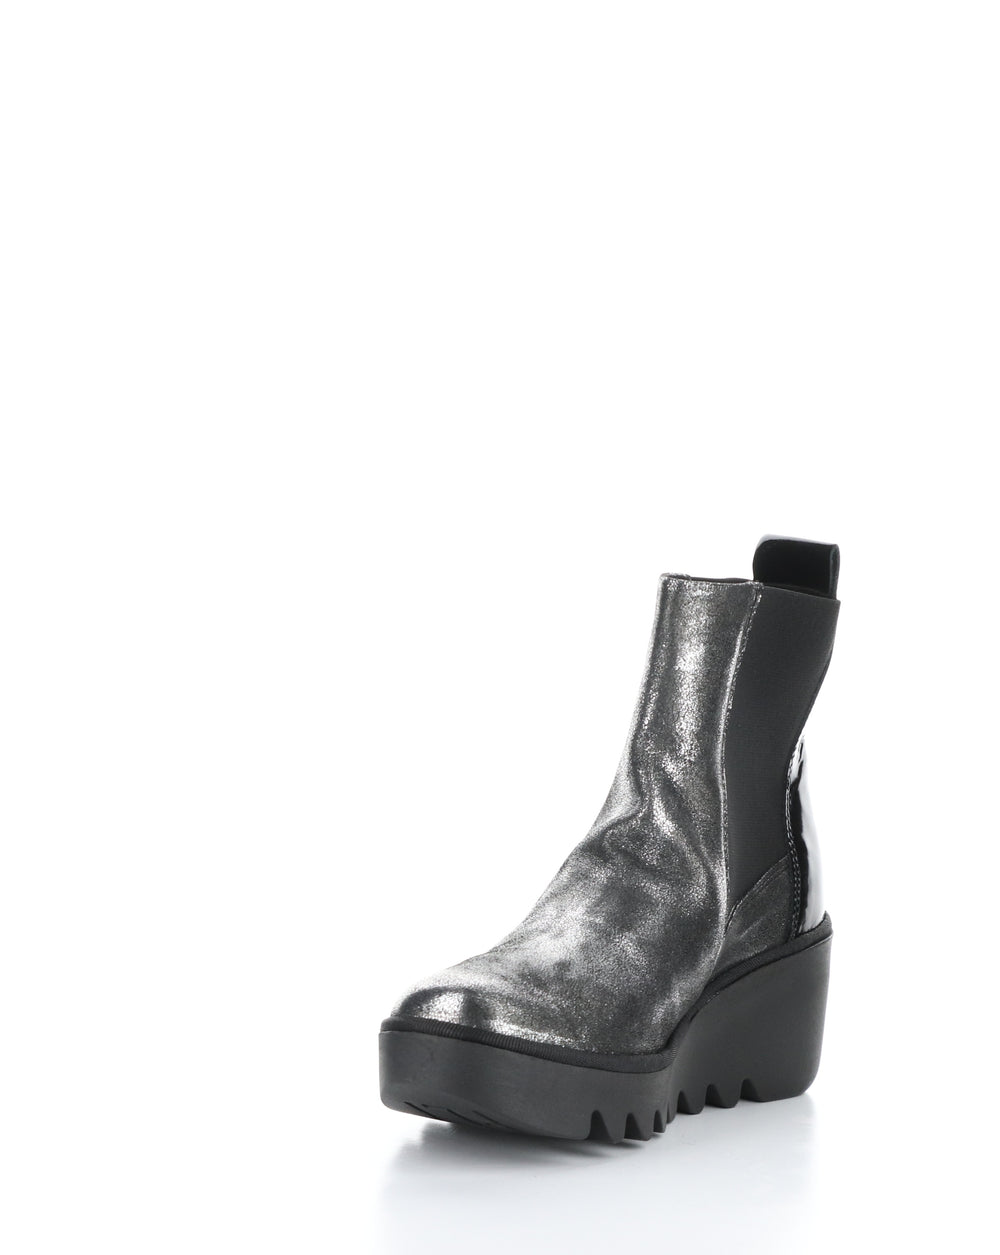 BAGU233FLY 018 SILVER/BLACK Elasticated Boots